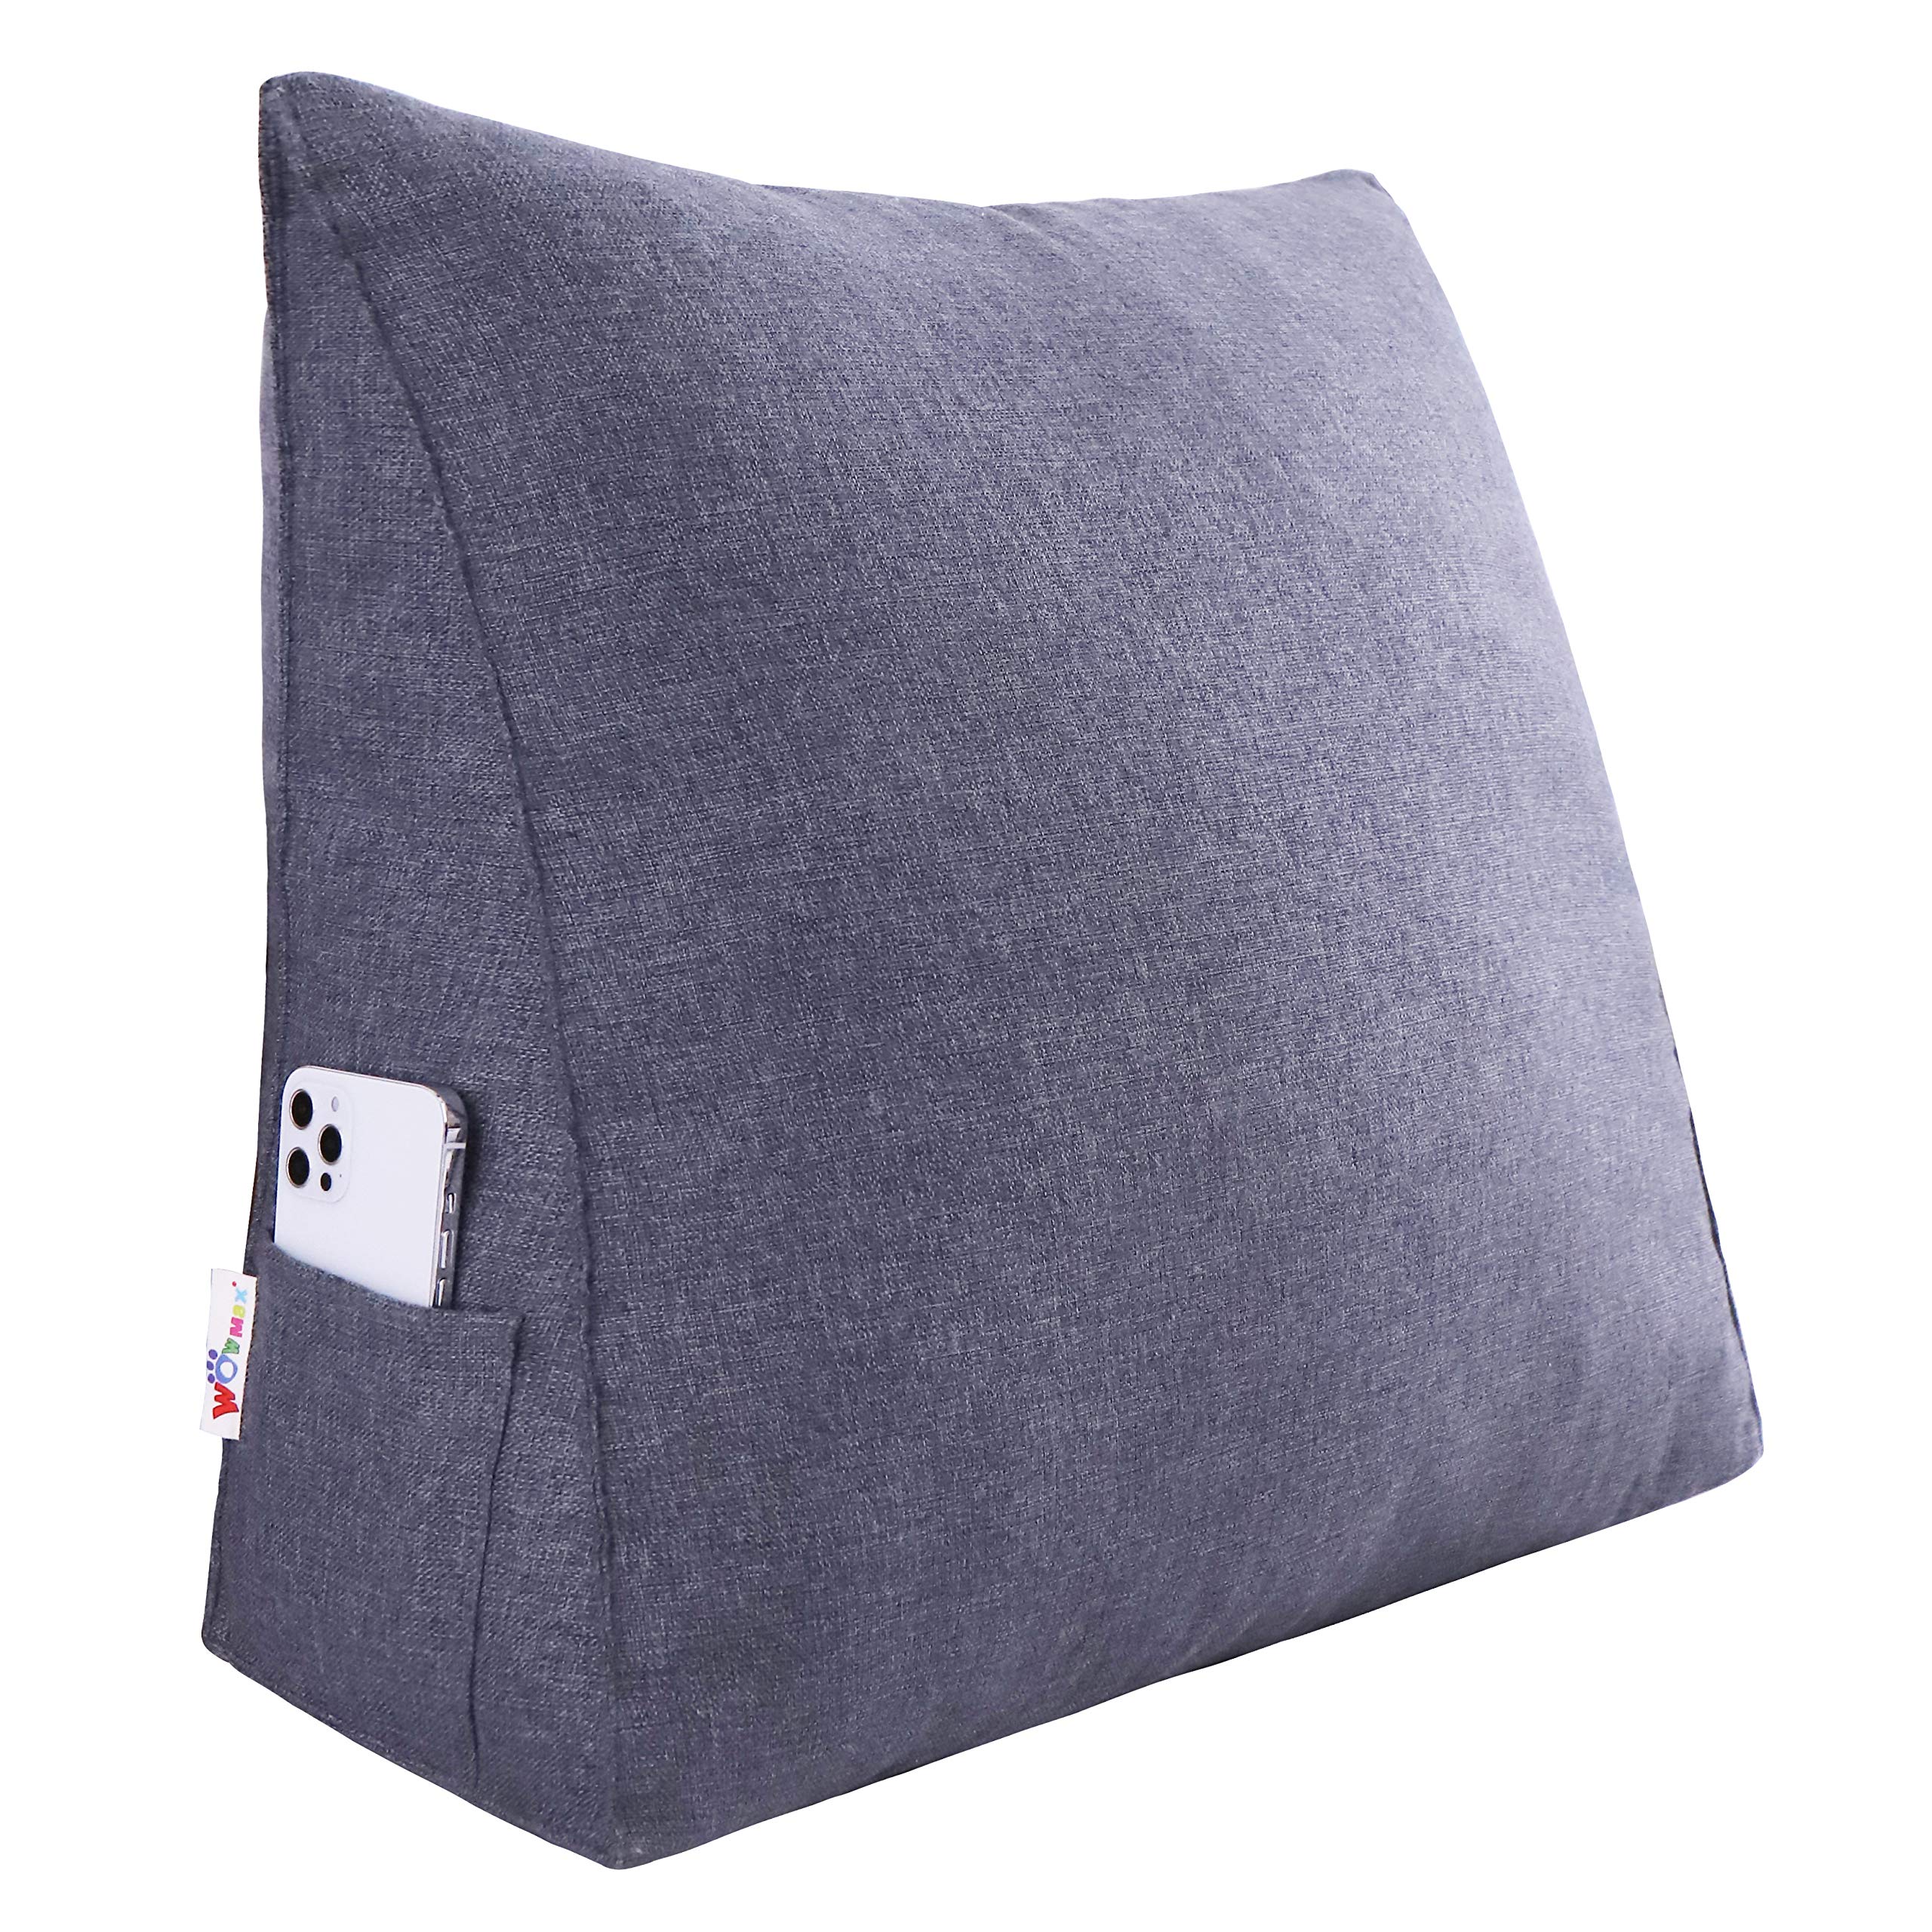 Triangular Bed Wedge Pillow with Removable and Washable Cover Linen— Dark Grey 23.5 Inches